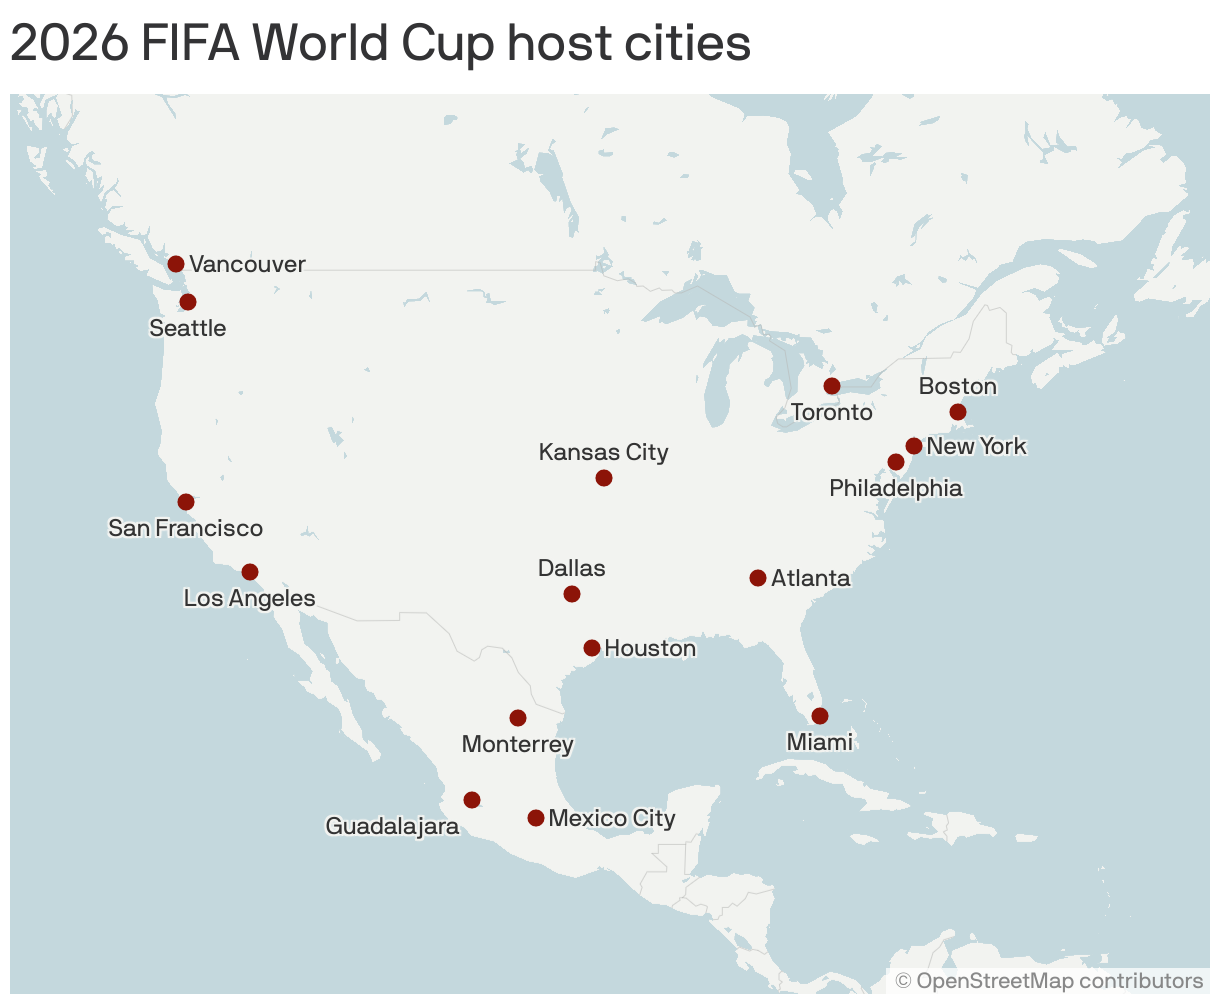 2026 FIFA World Cup host cities